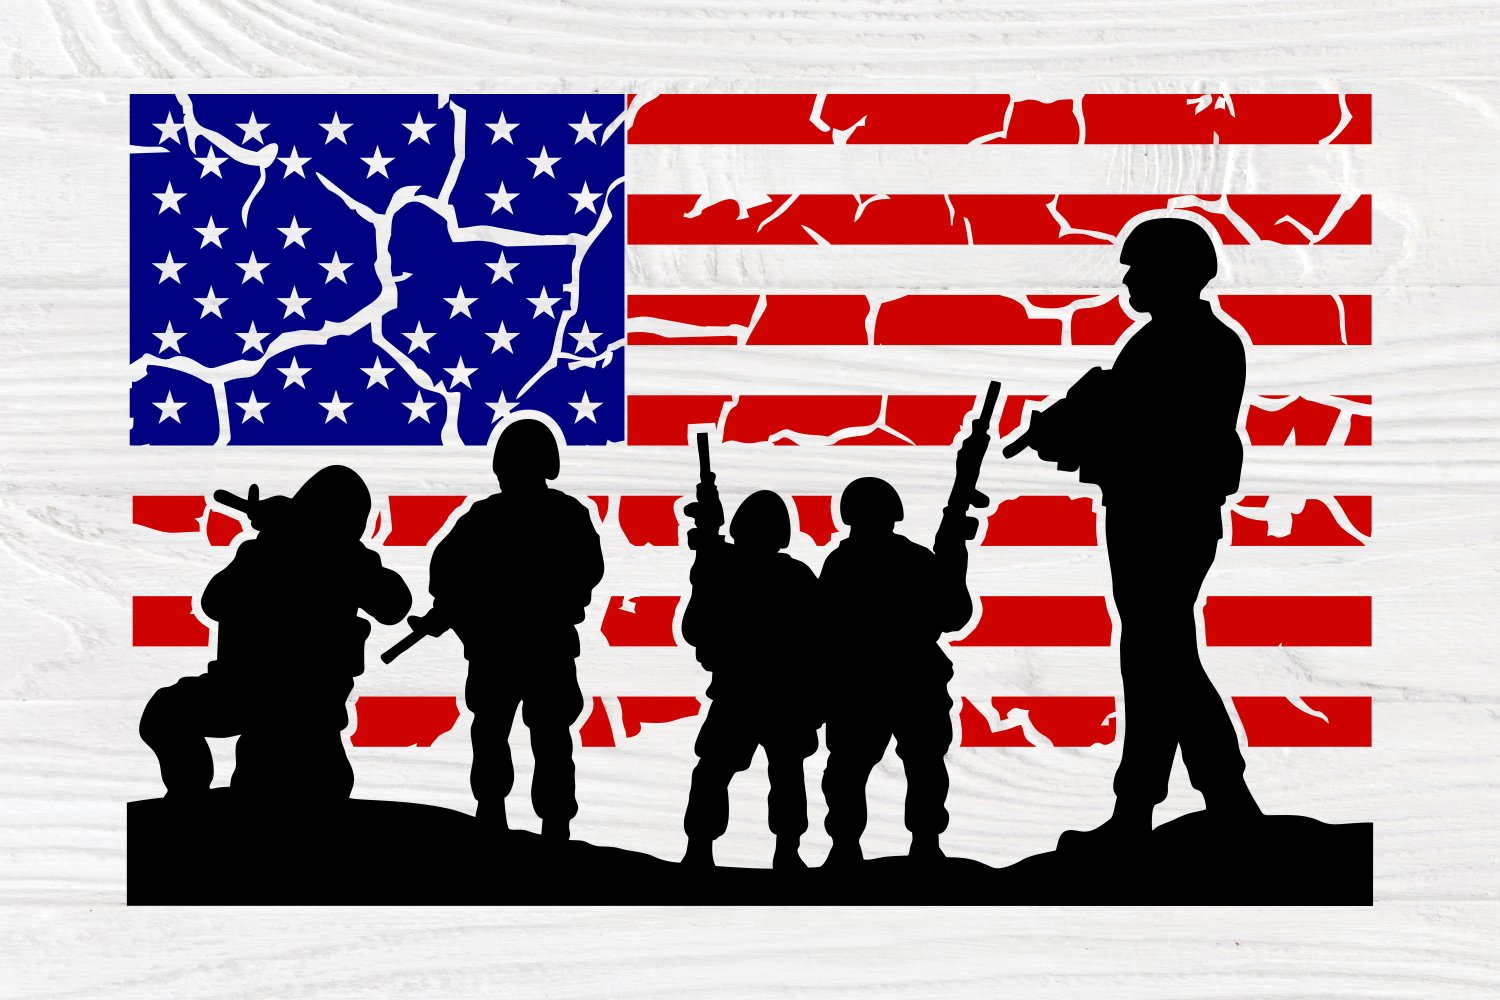 Awesome flag on background with military.